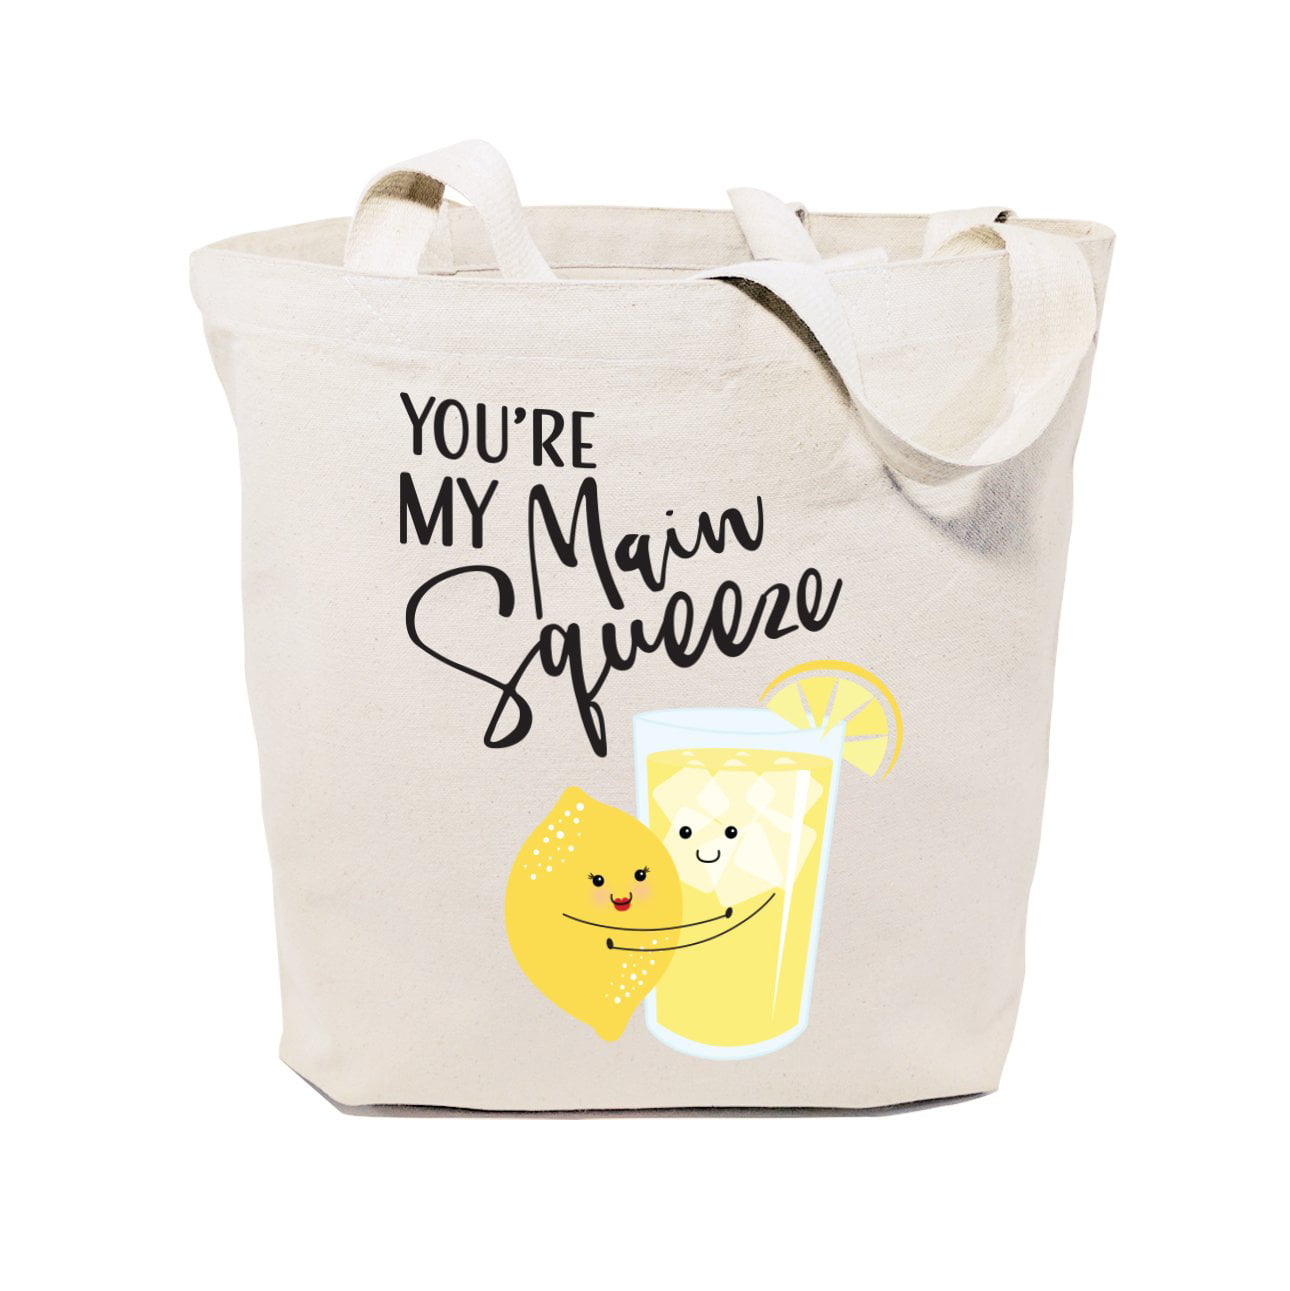 Details about   You're Totally My Jam Cotton Canvas Tote Bag 